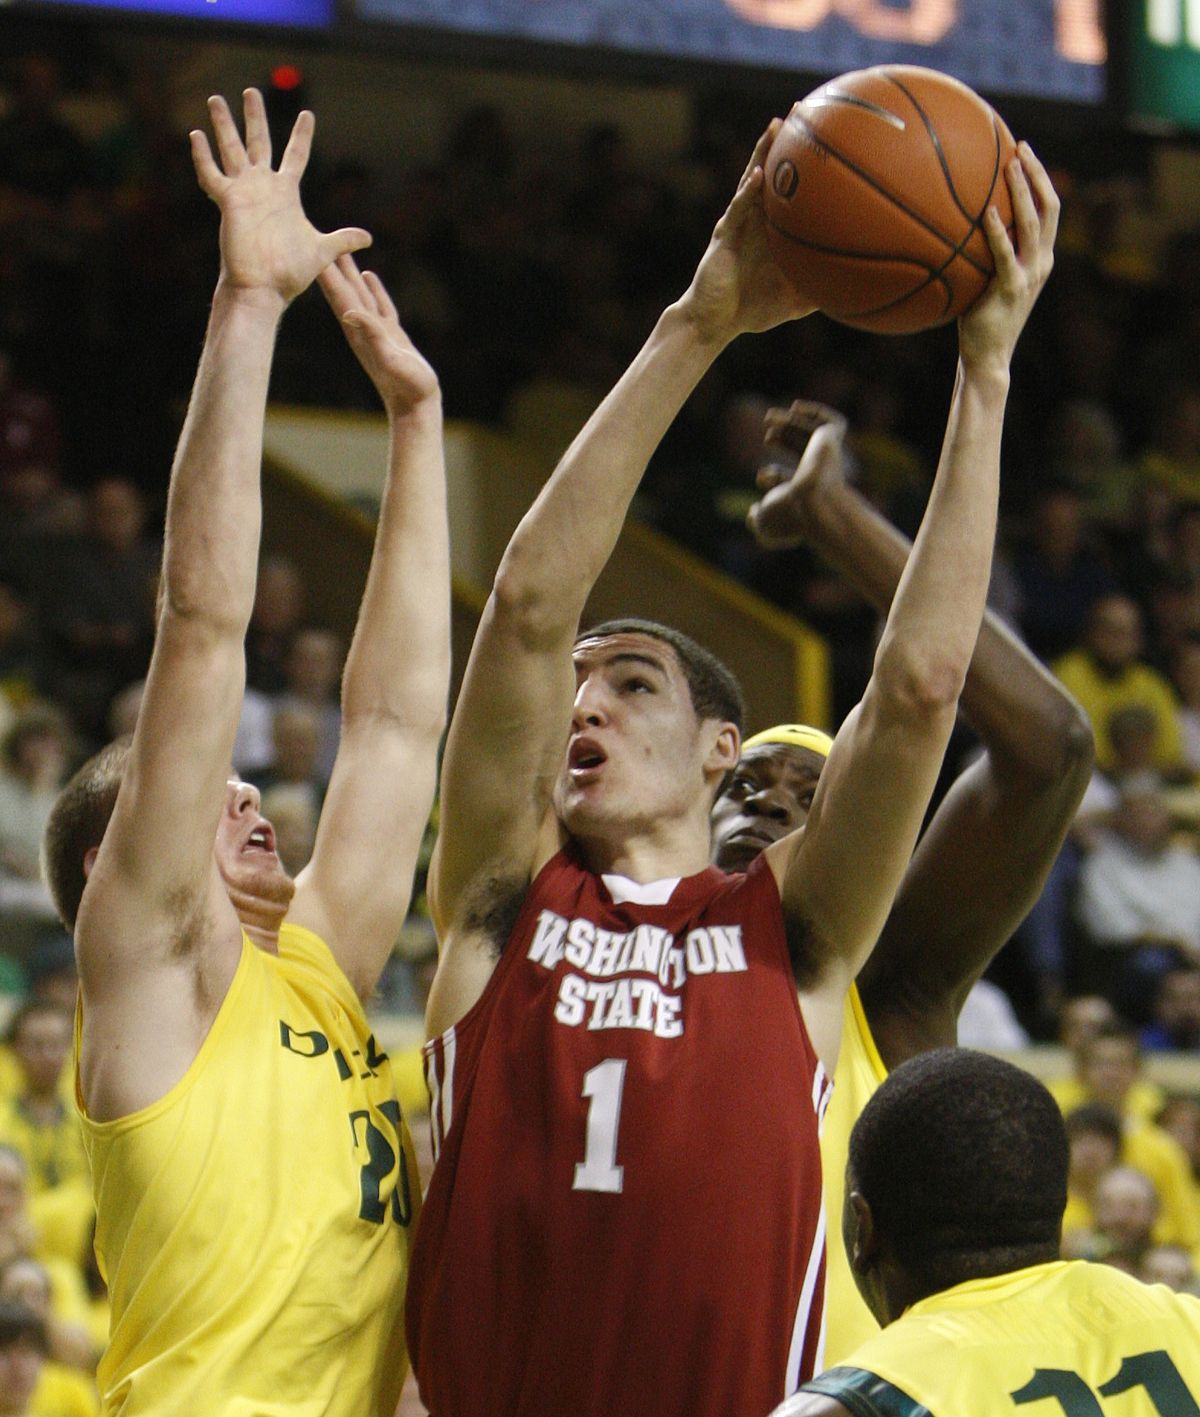 Cougars’ Klay Thompson, center, goes to the basket in the first half. (Associated Press)